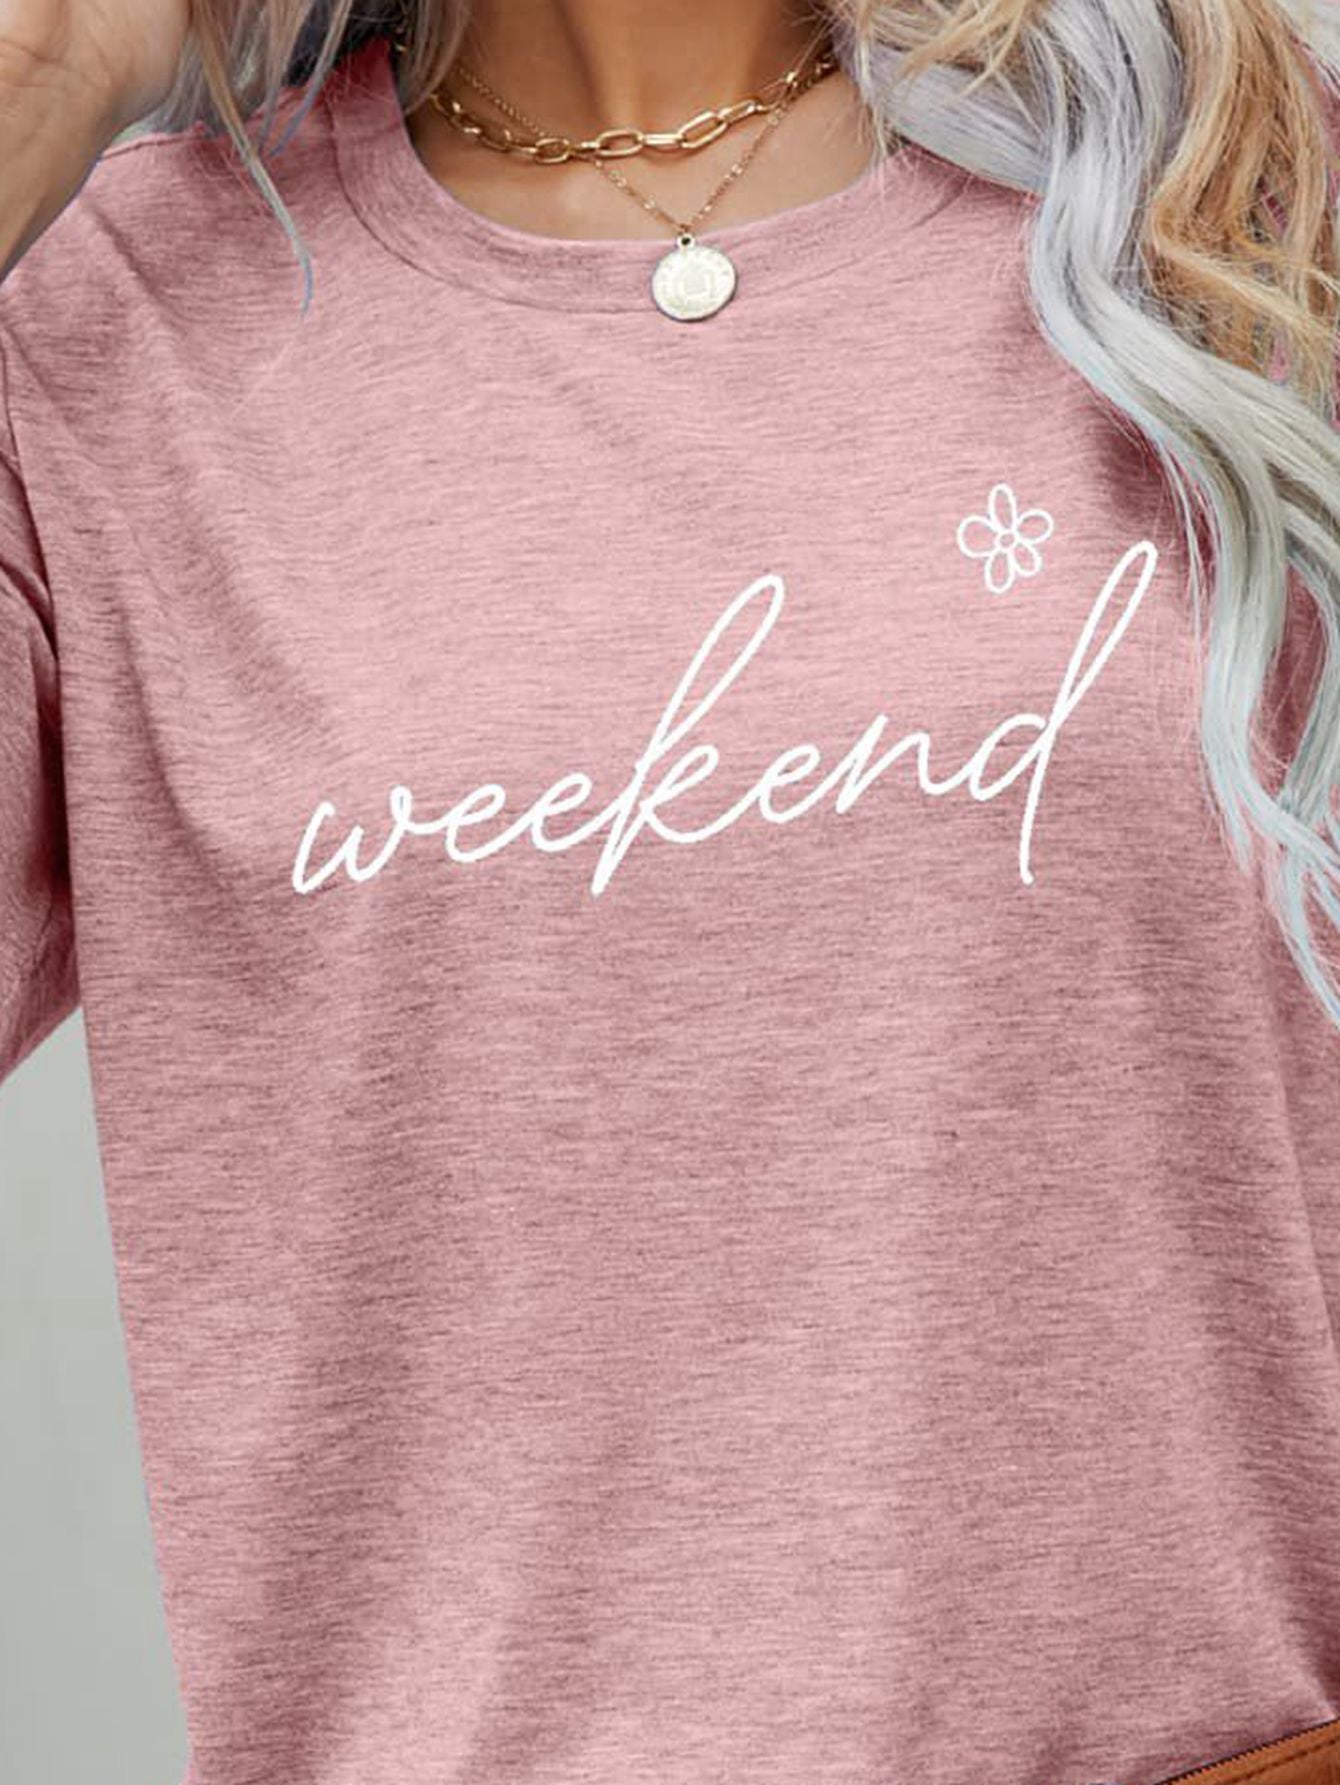 WEEKEND Flower Graphic Short Sleeve Tee - T-Shirts - Shirts & Tops - 6 - 2024